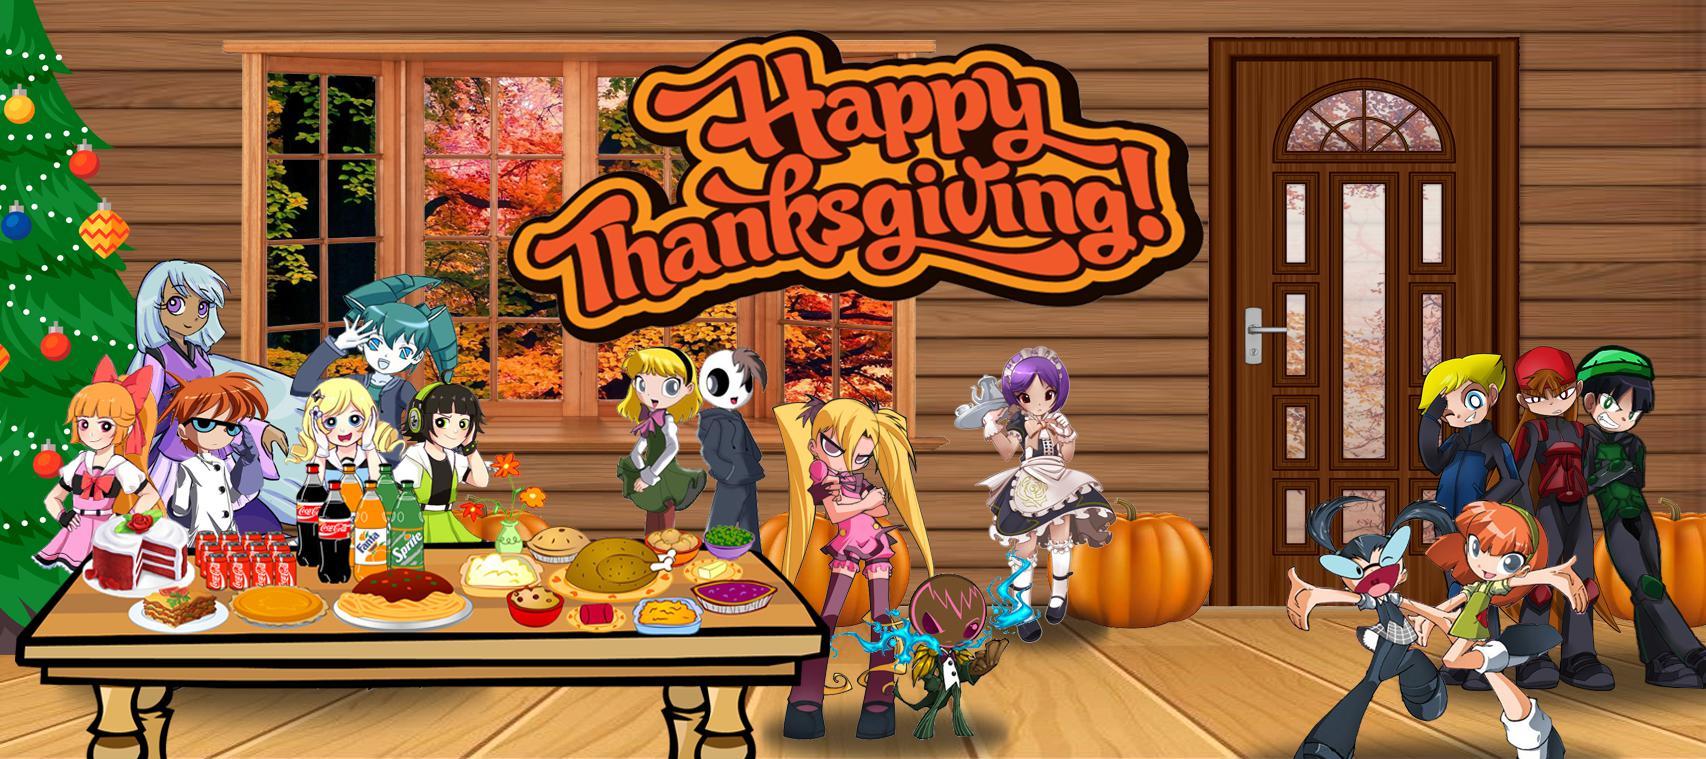 Belated Happy Thanksgiving From Cn Along With Nickelodeon And